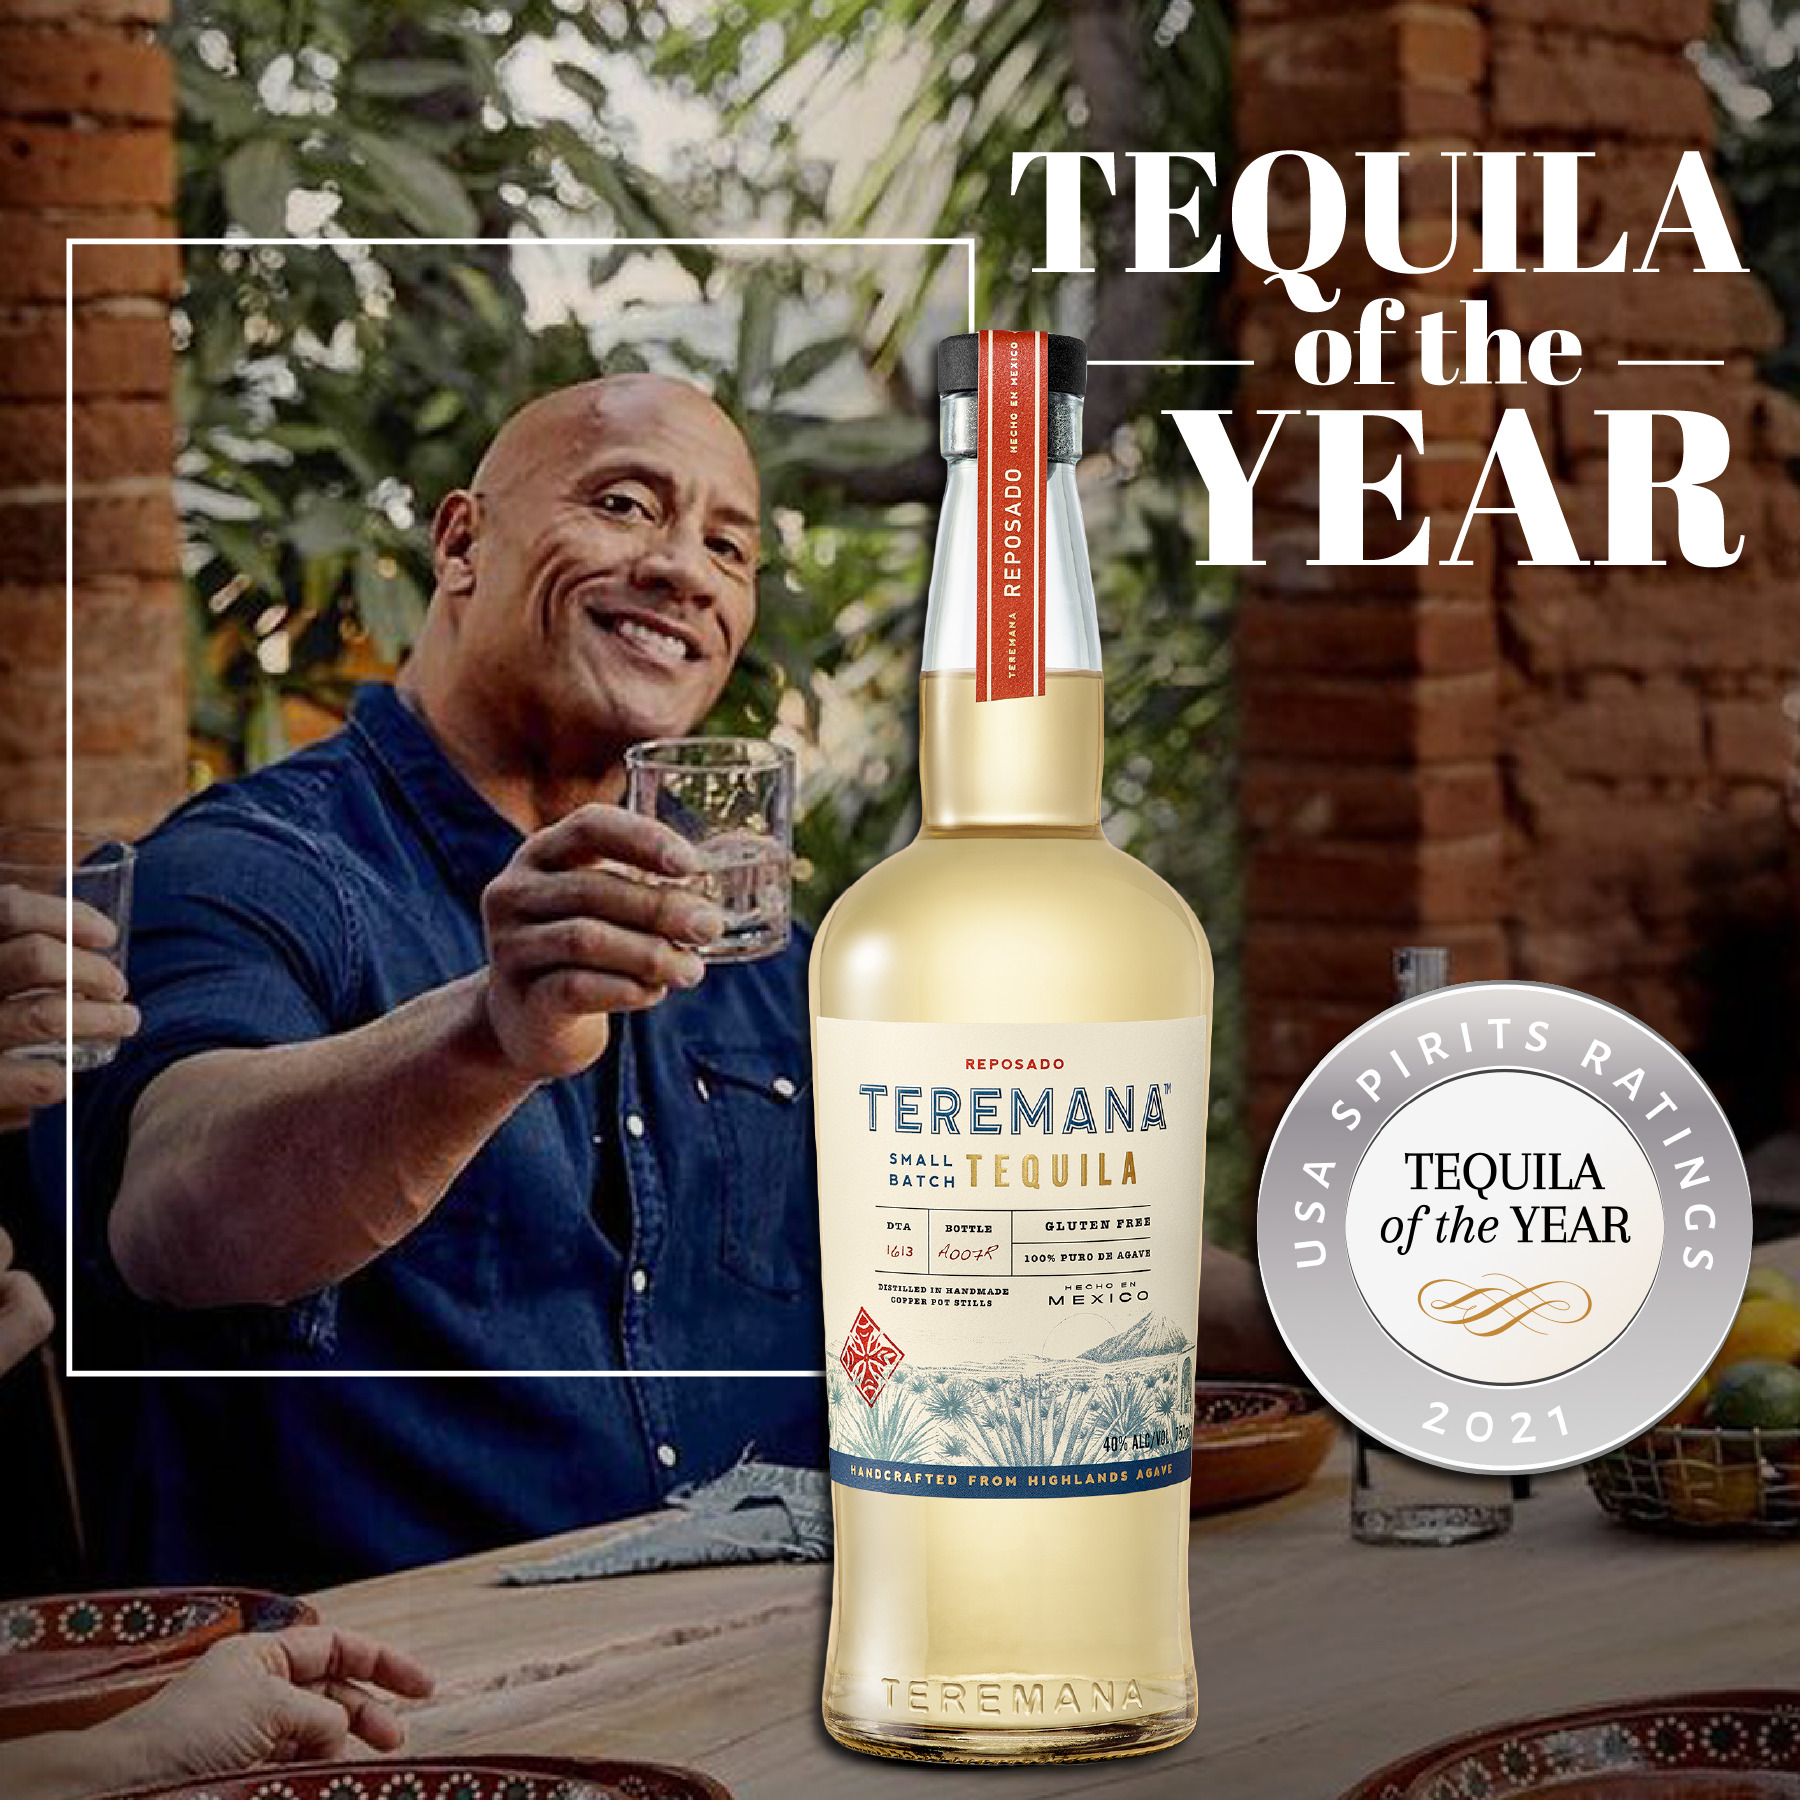 Tequila of the year - Teremana Tequila